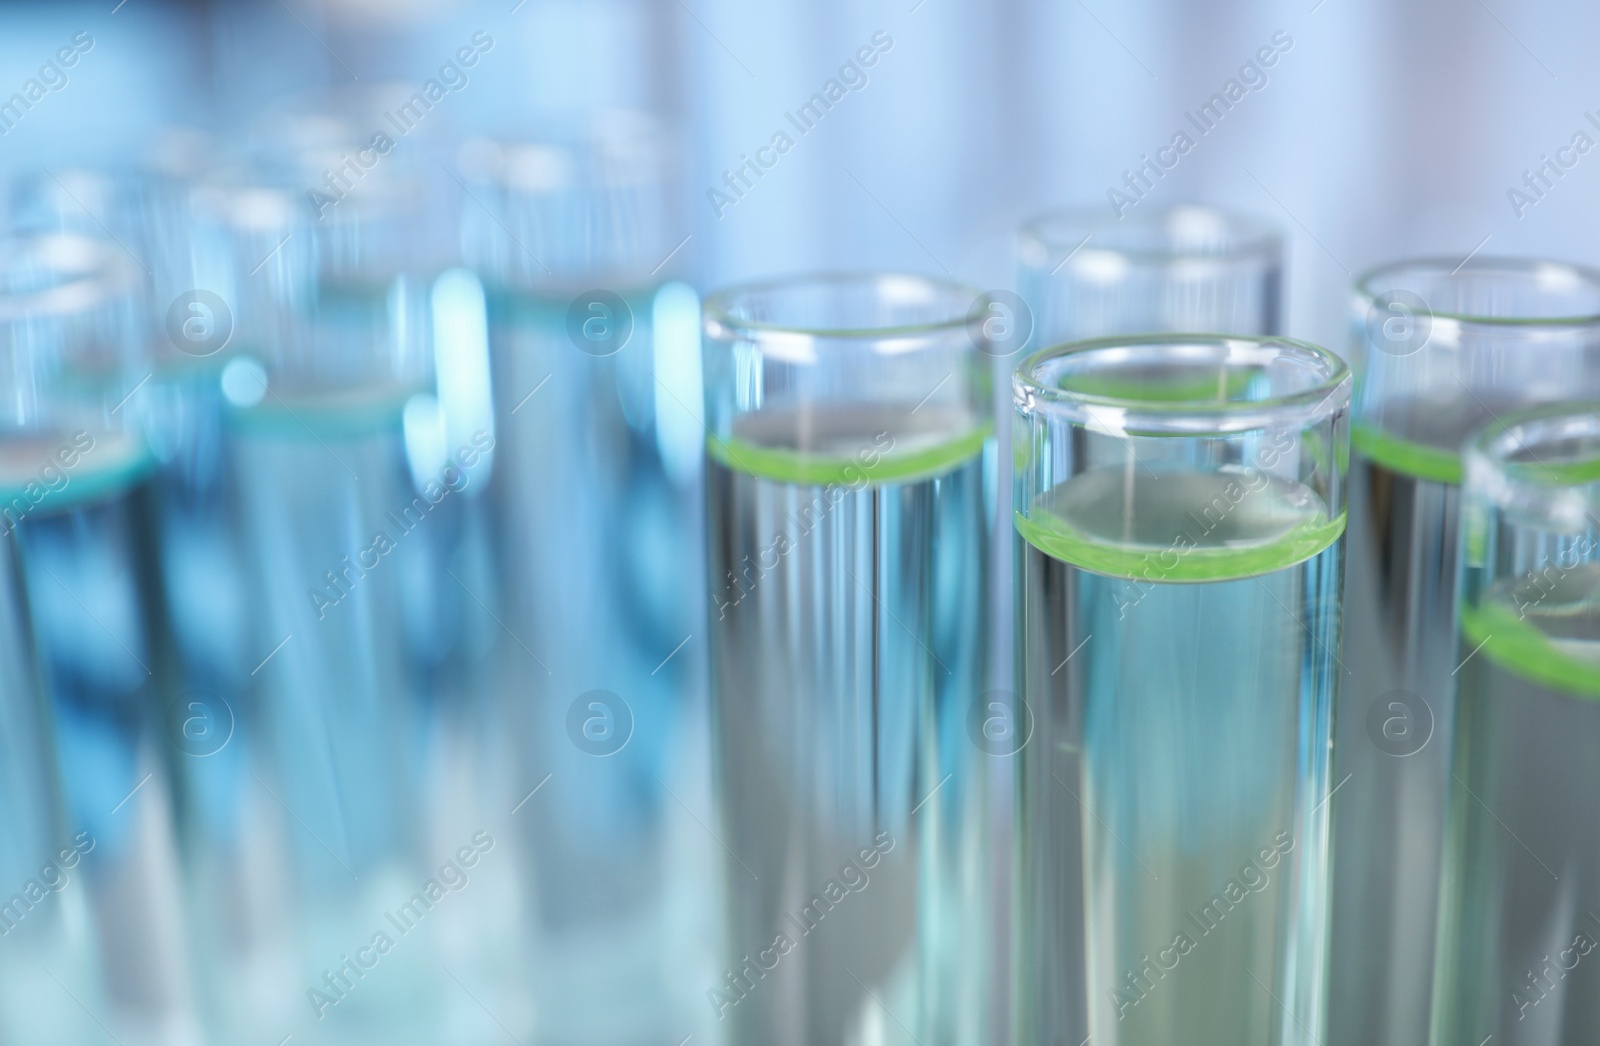 Photo of Test tubes with liquid on blurred background, space for text. Laboratory analysis